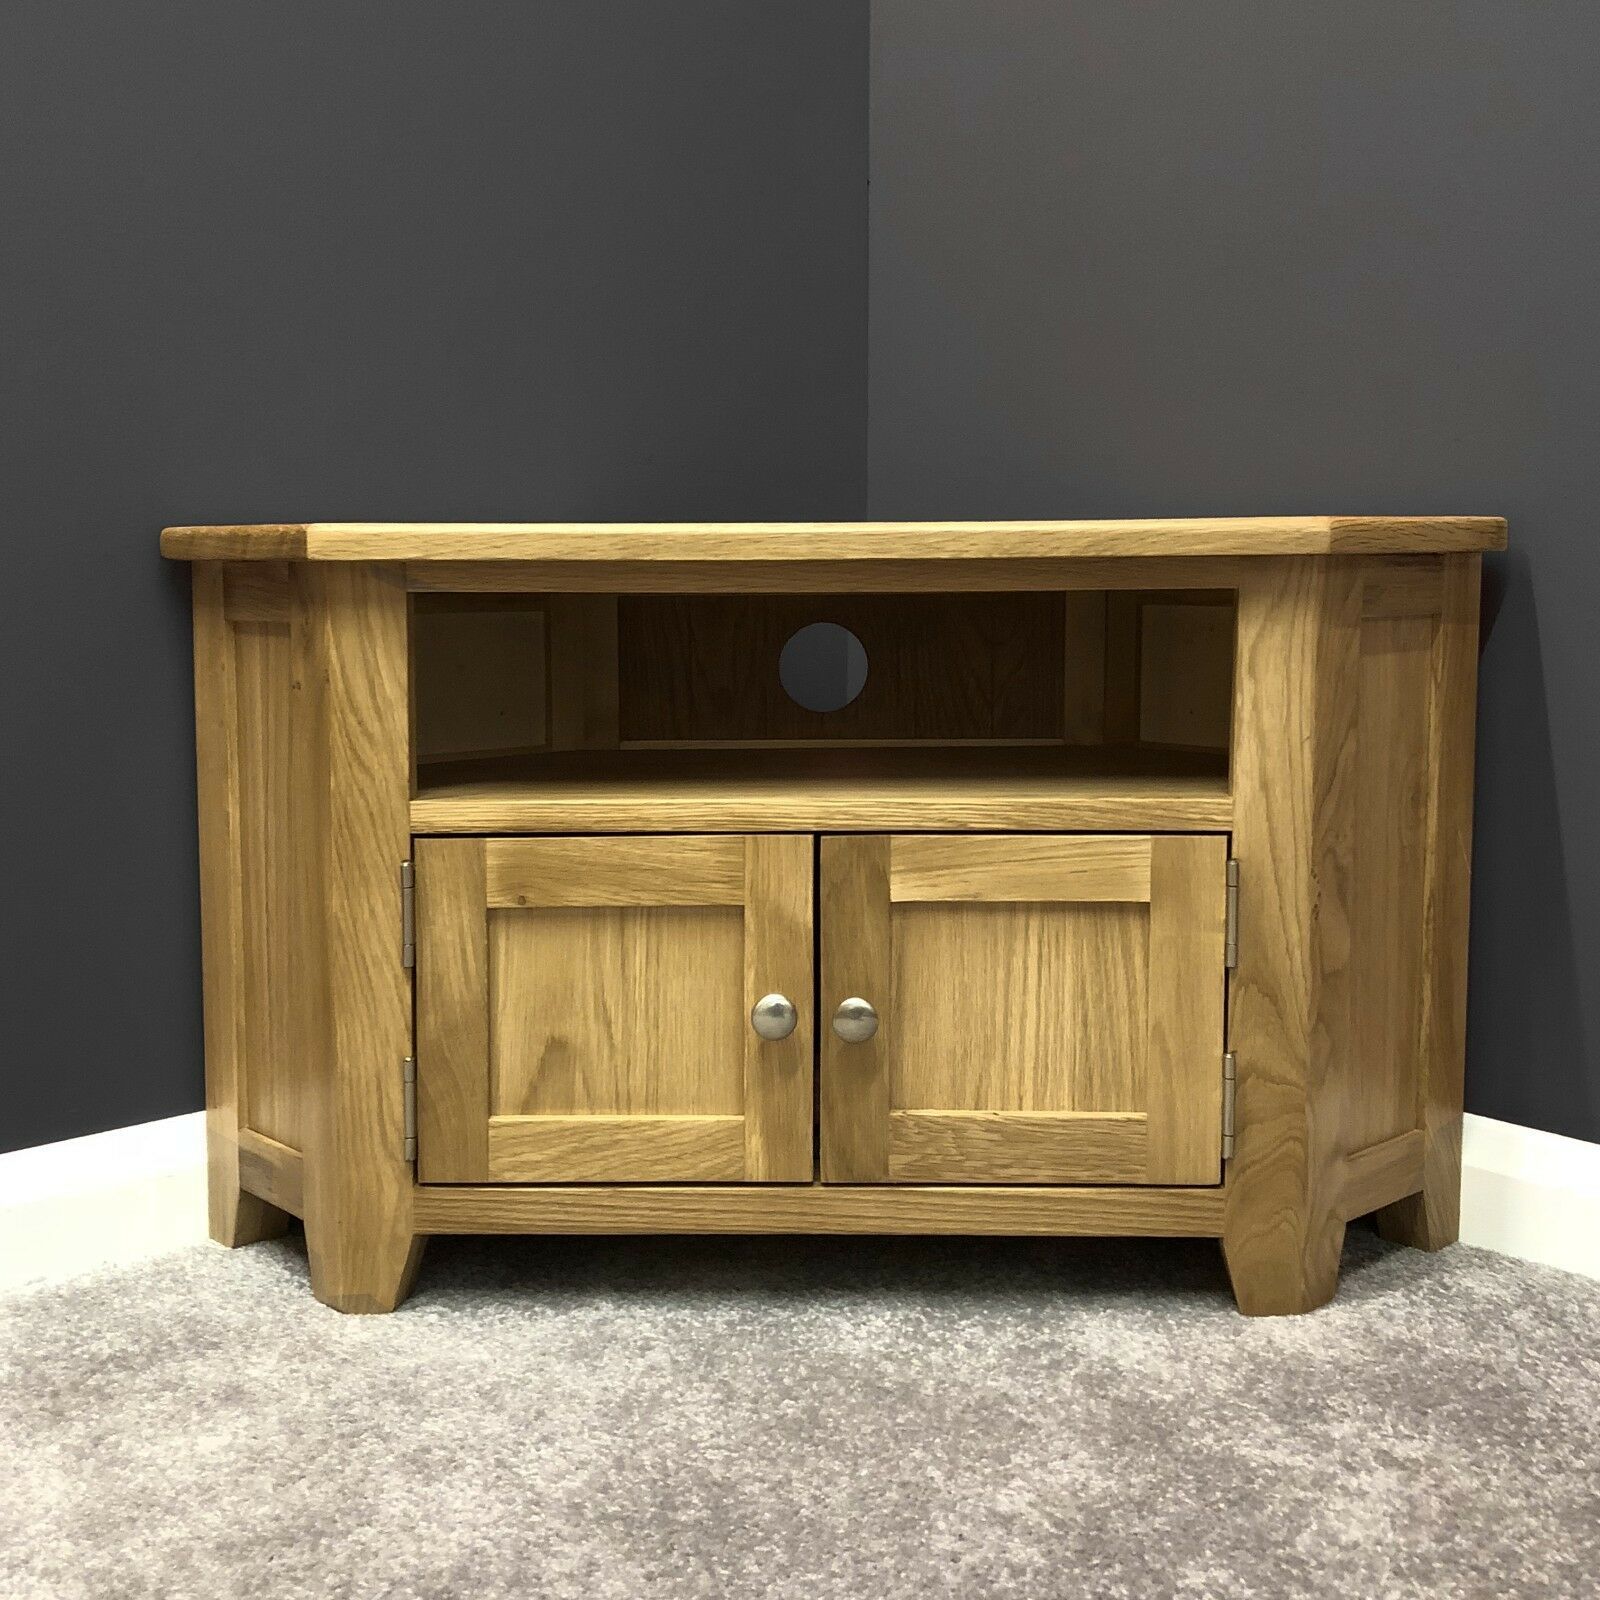 Oak Corner Tv Stand With Doors / Solid Wood Television Inside Sidmouth Oak Corner Tv Stands (View 2 of 15)